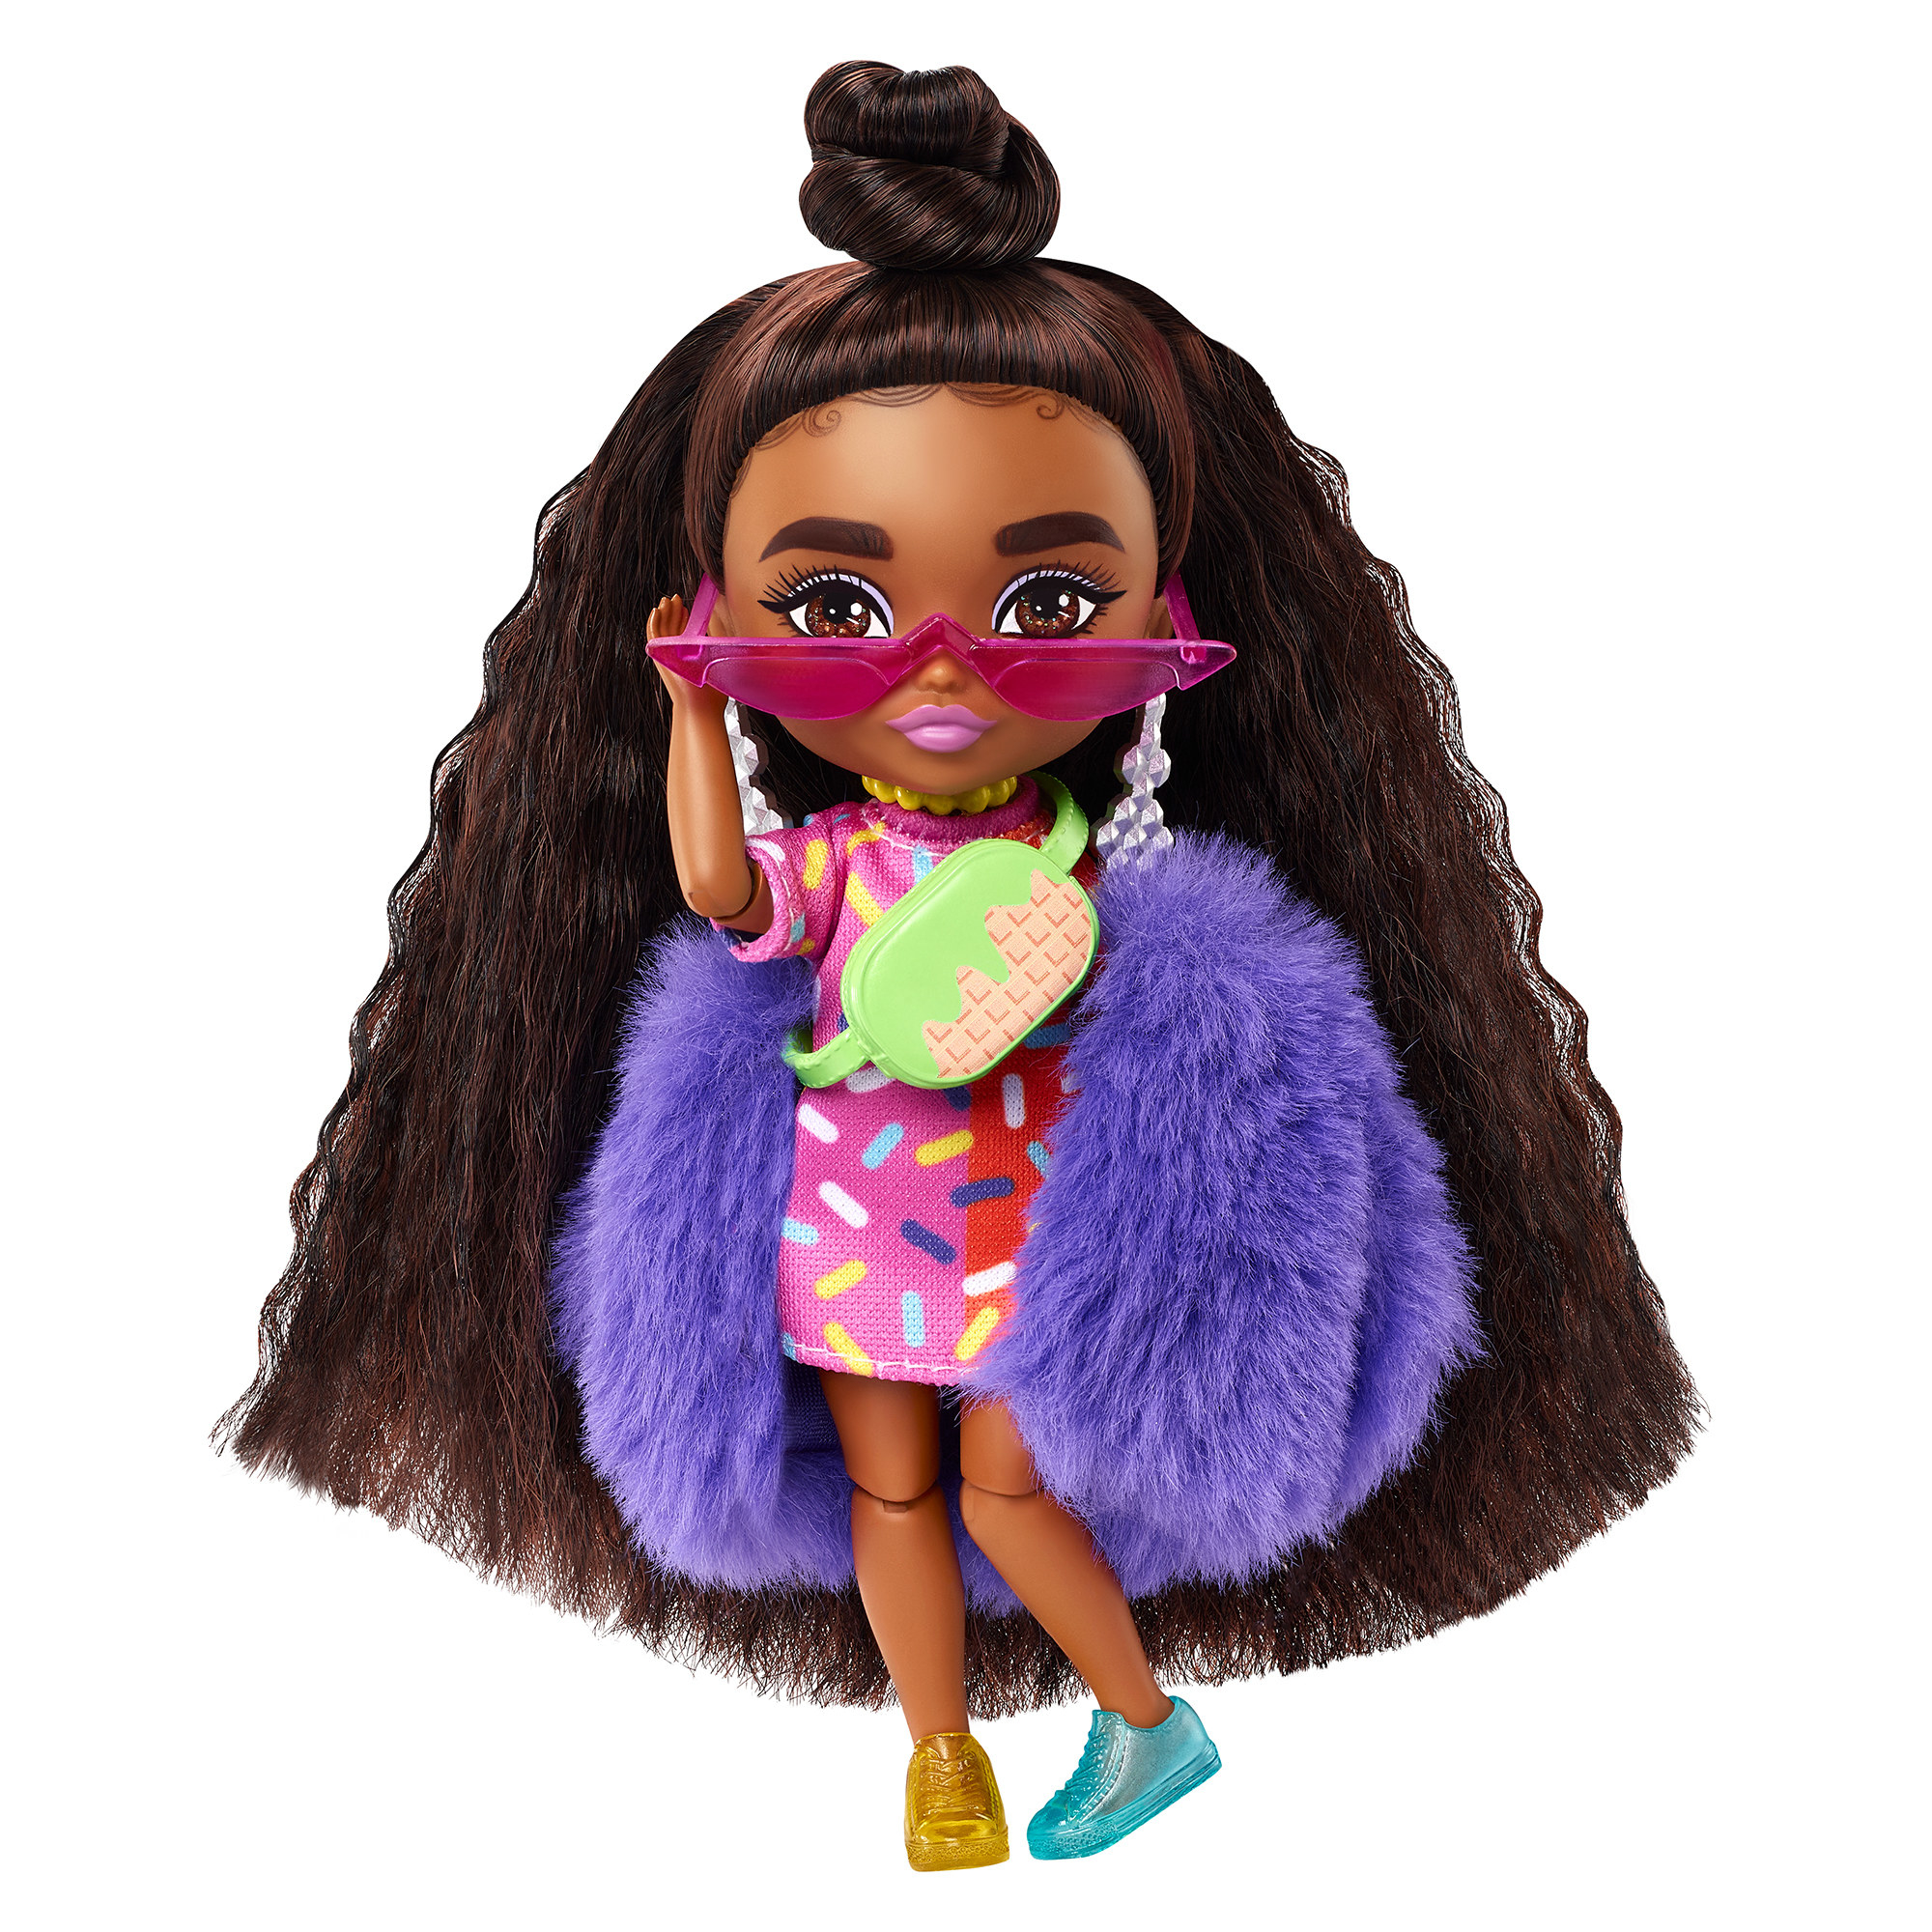 the mini barbie with a stylish outfit